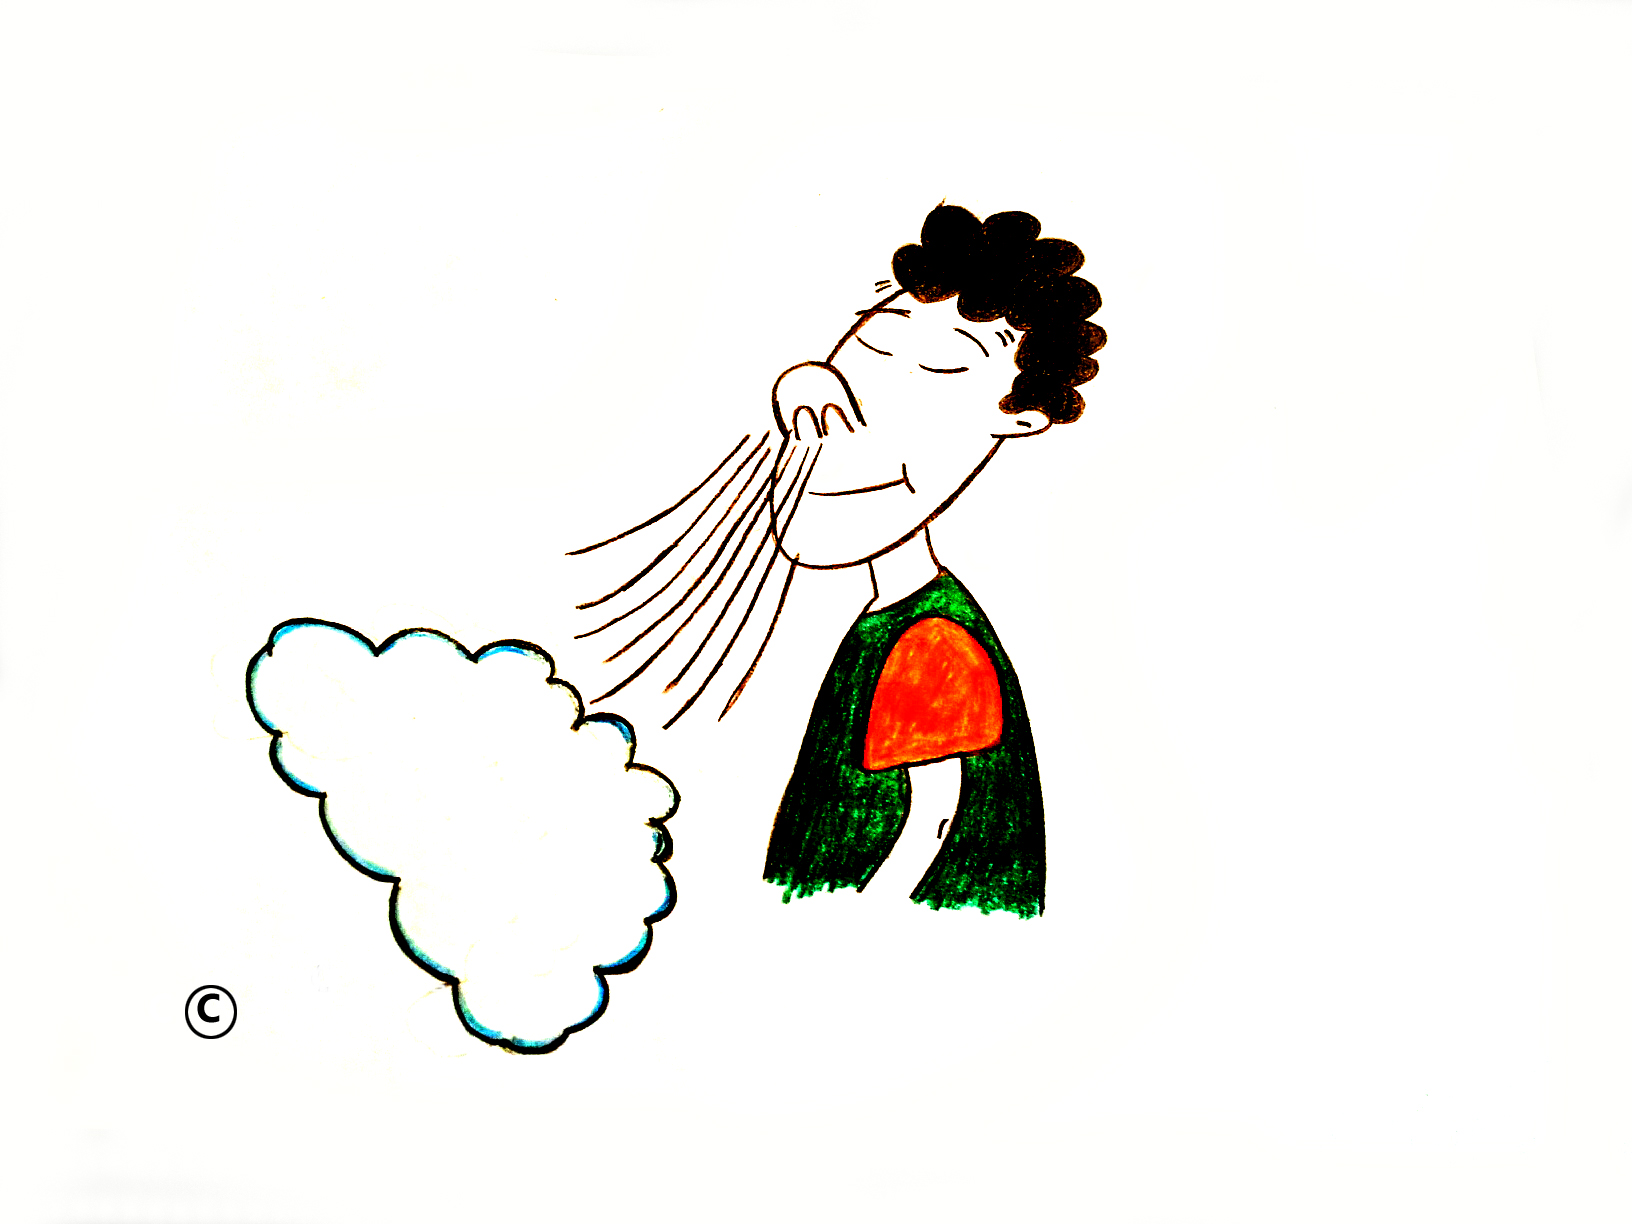 breathing in clipart